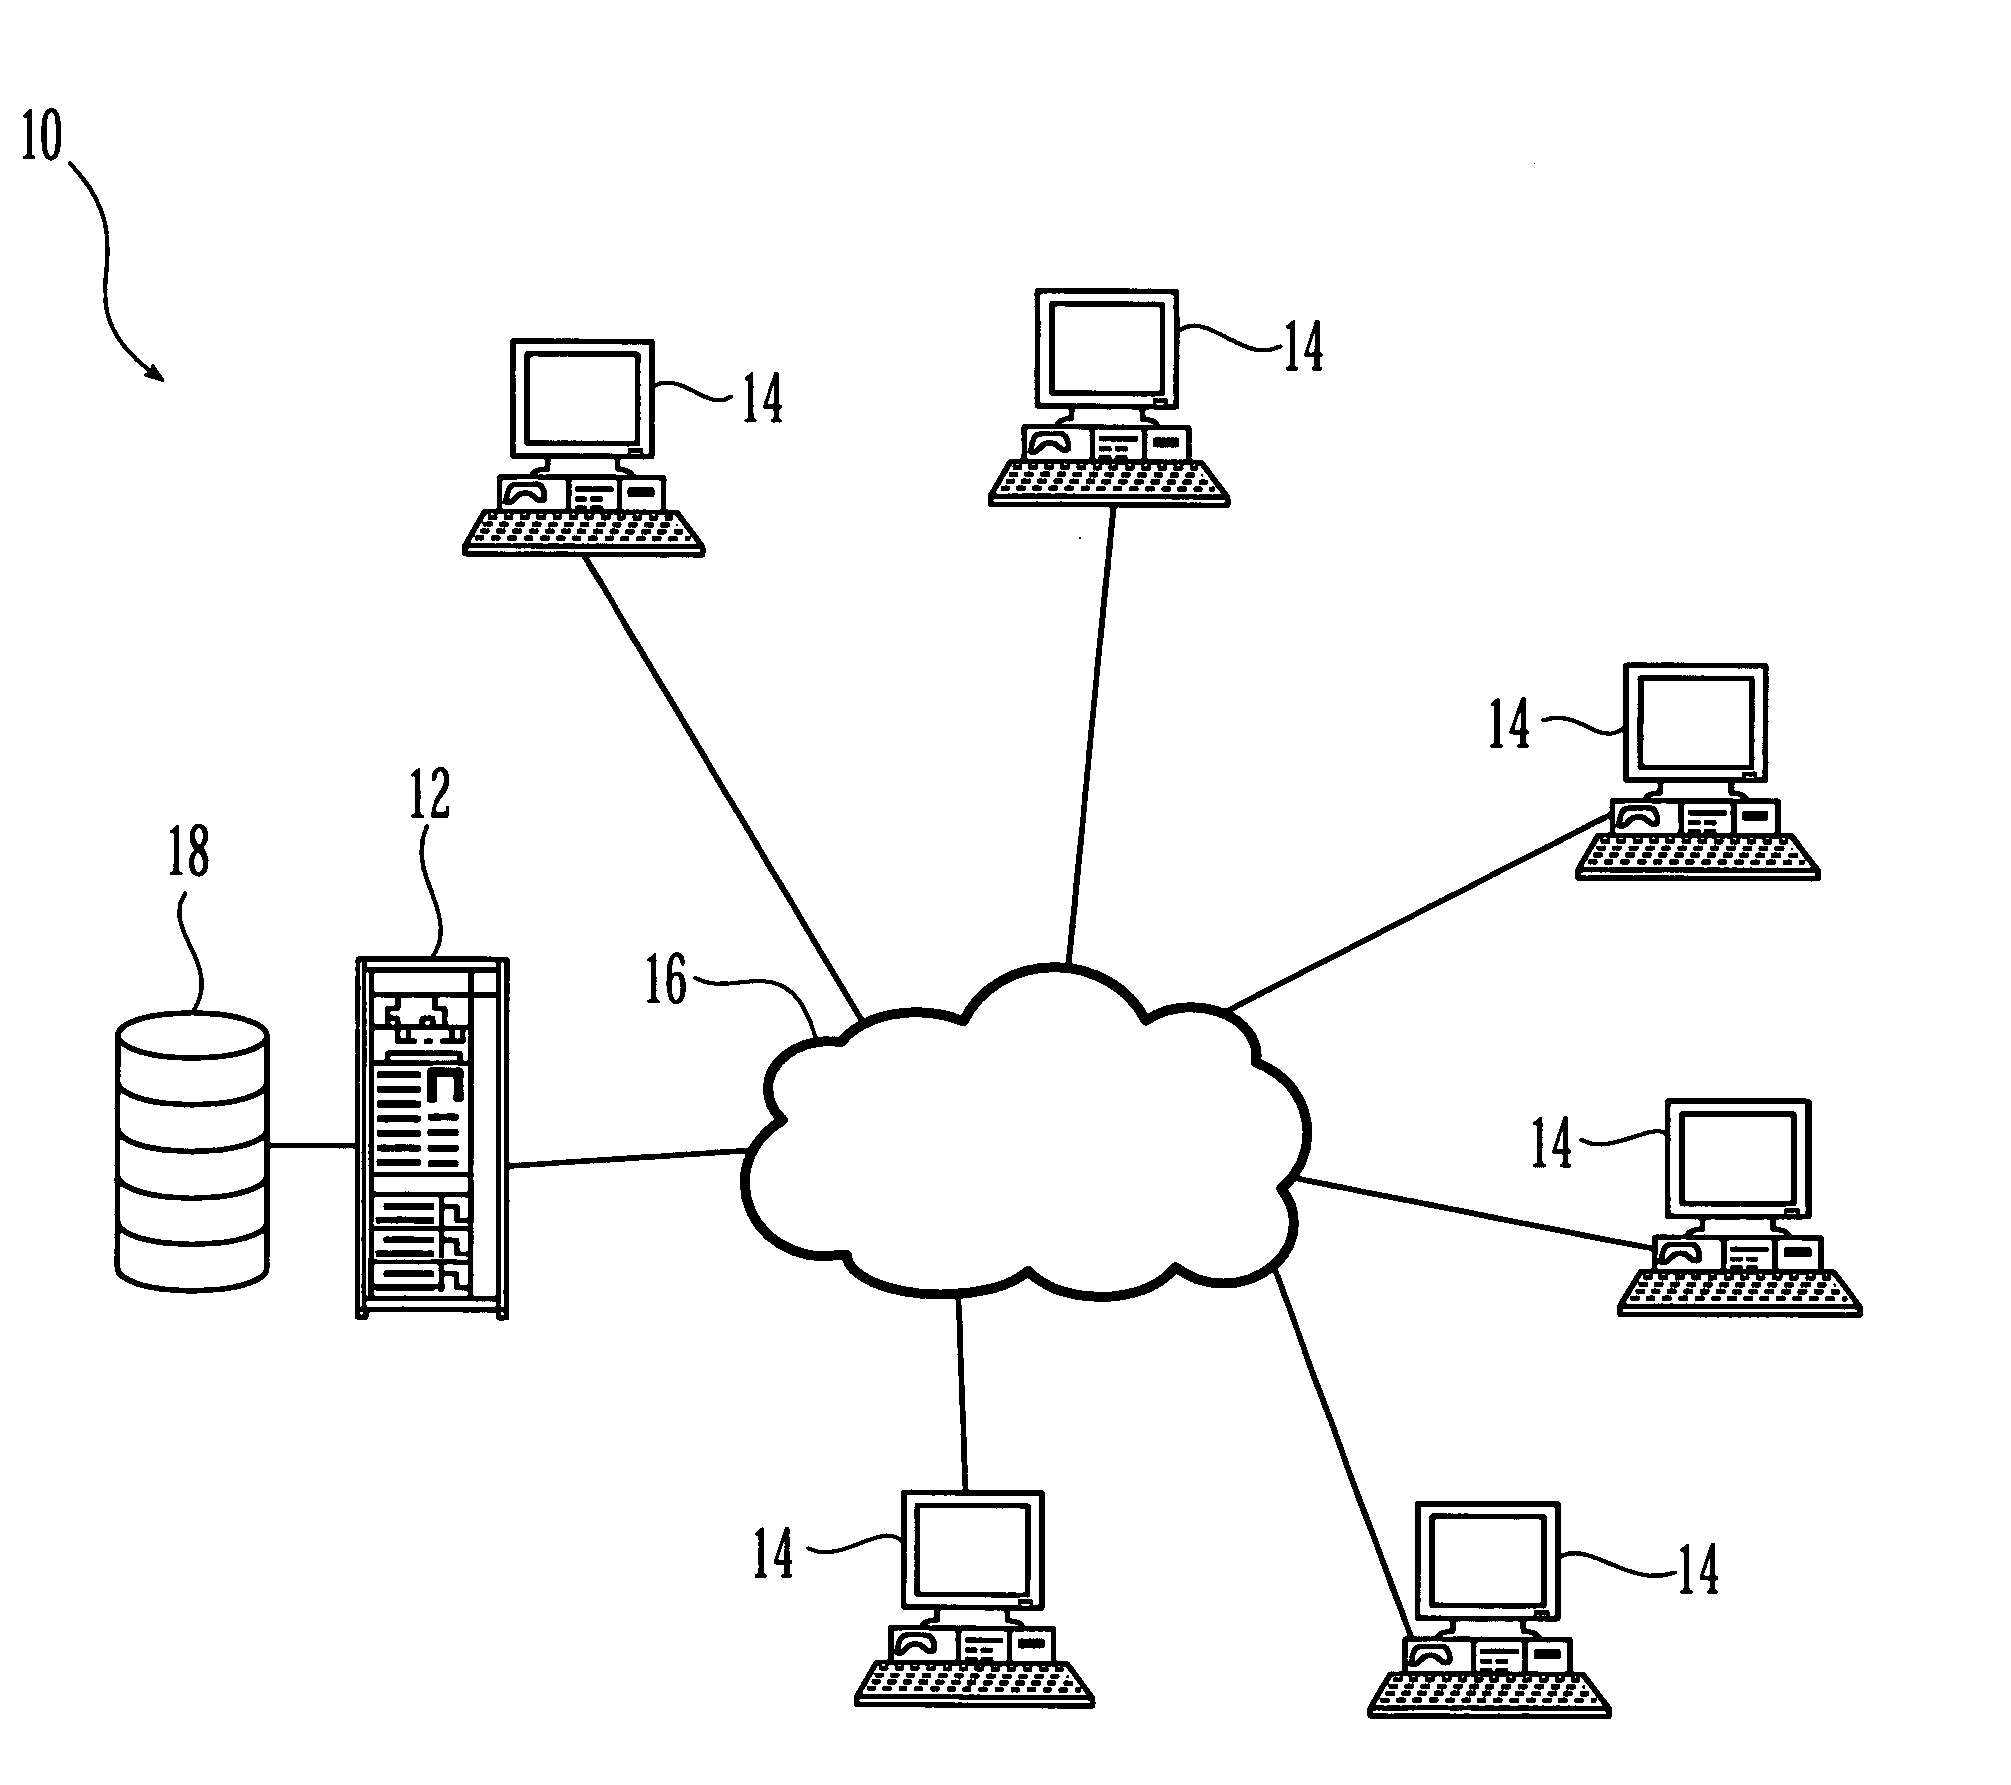 System and method of flexible data reduction for arbitrary applications